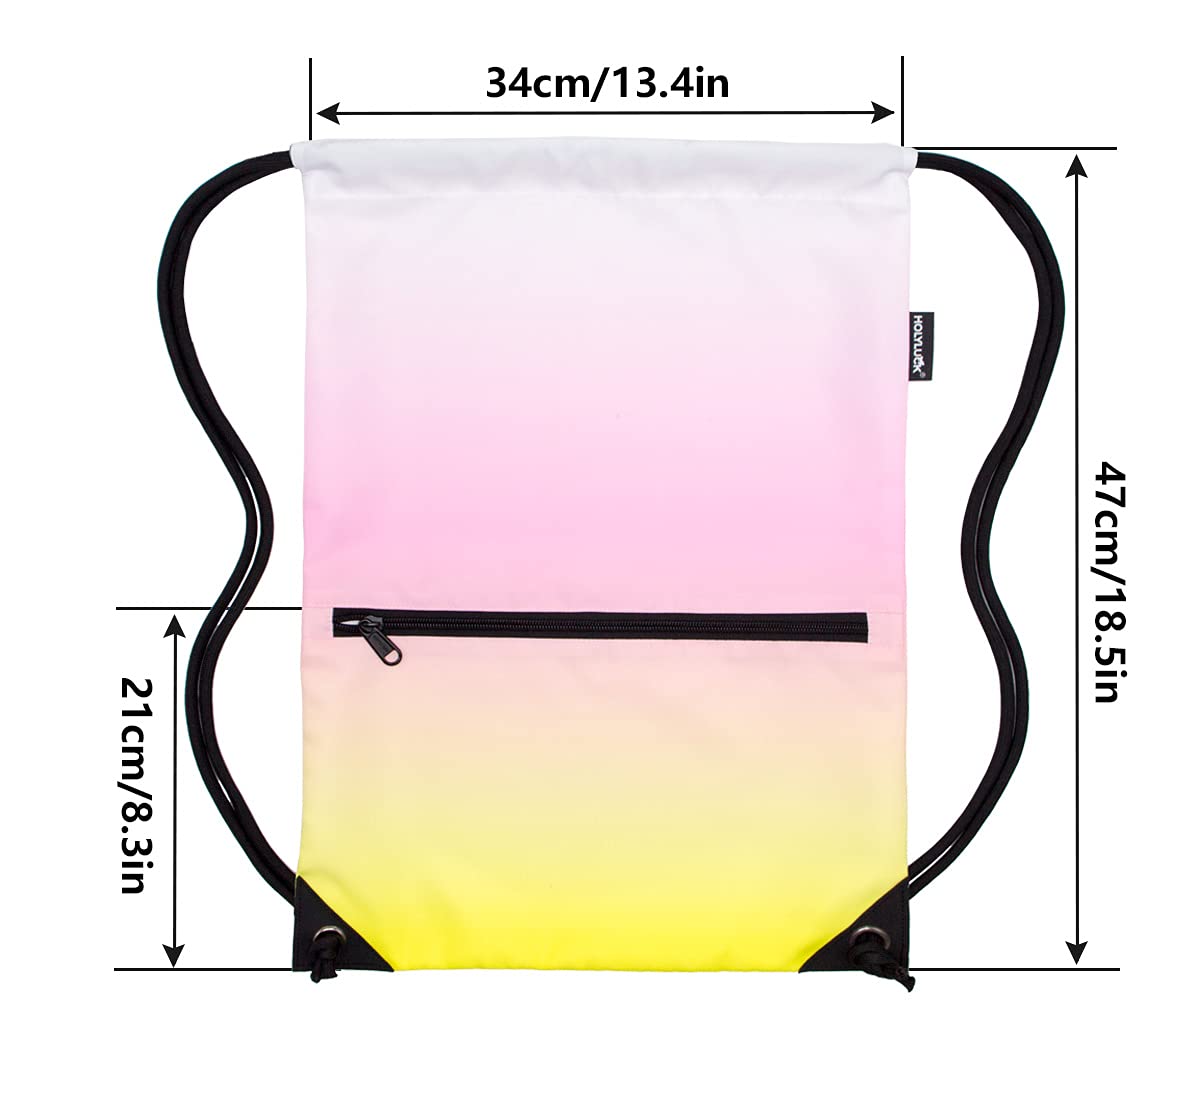 Drawstring Backpack Bag Sport Gym Sackpack Gradient Yellow Pink HLC001